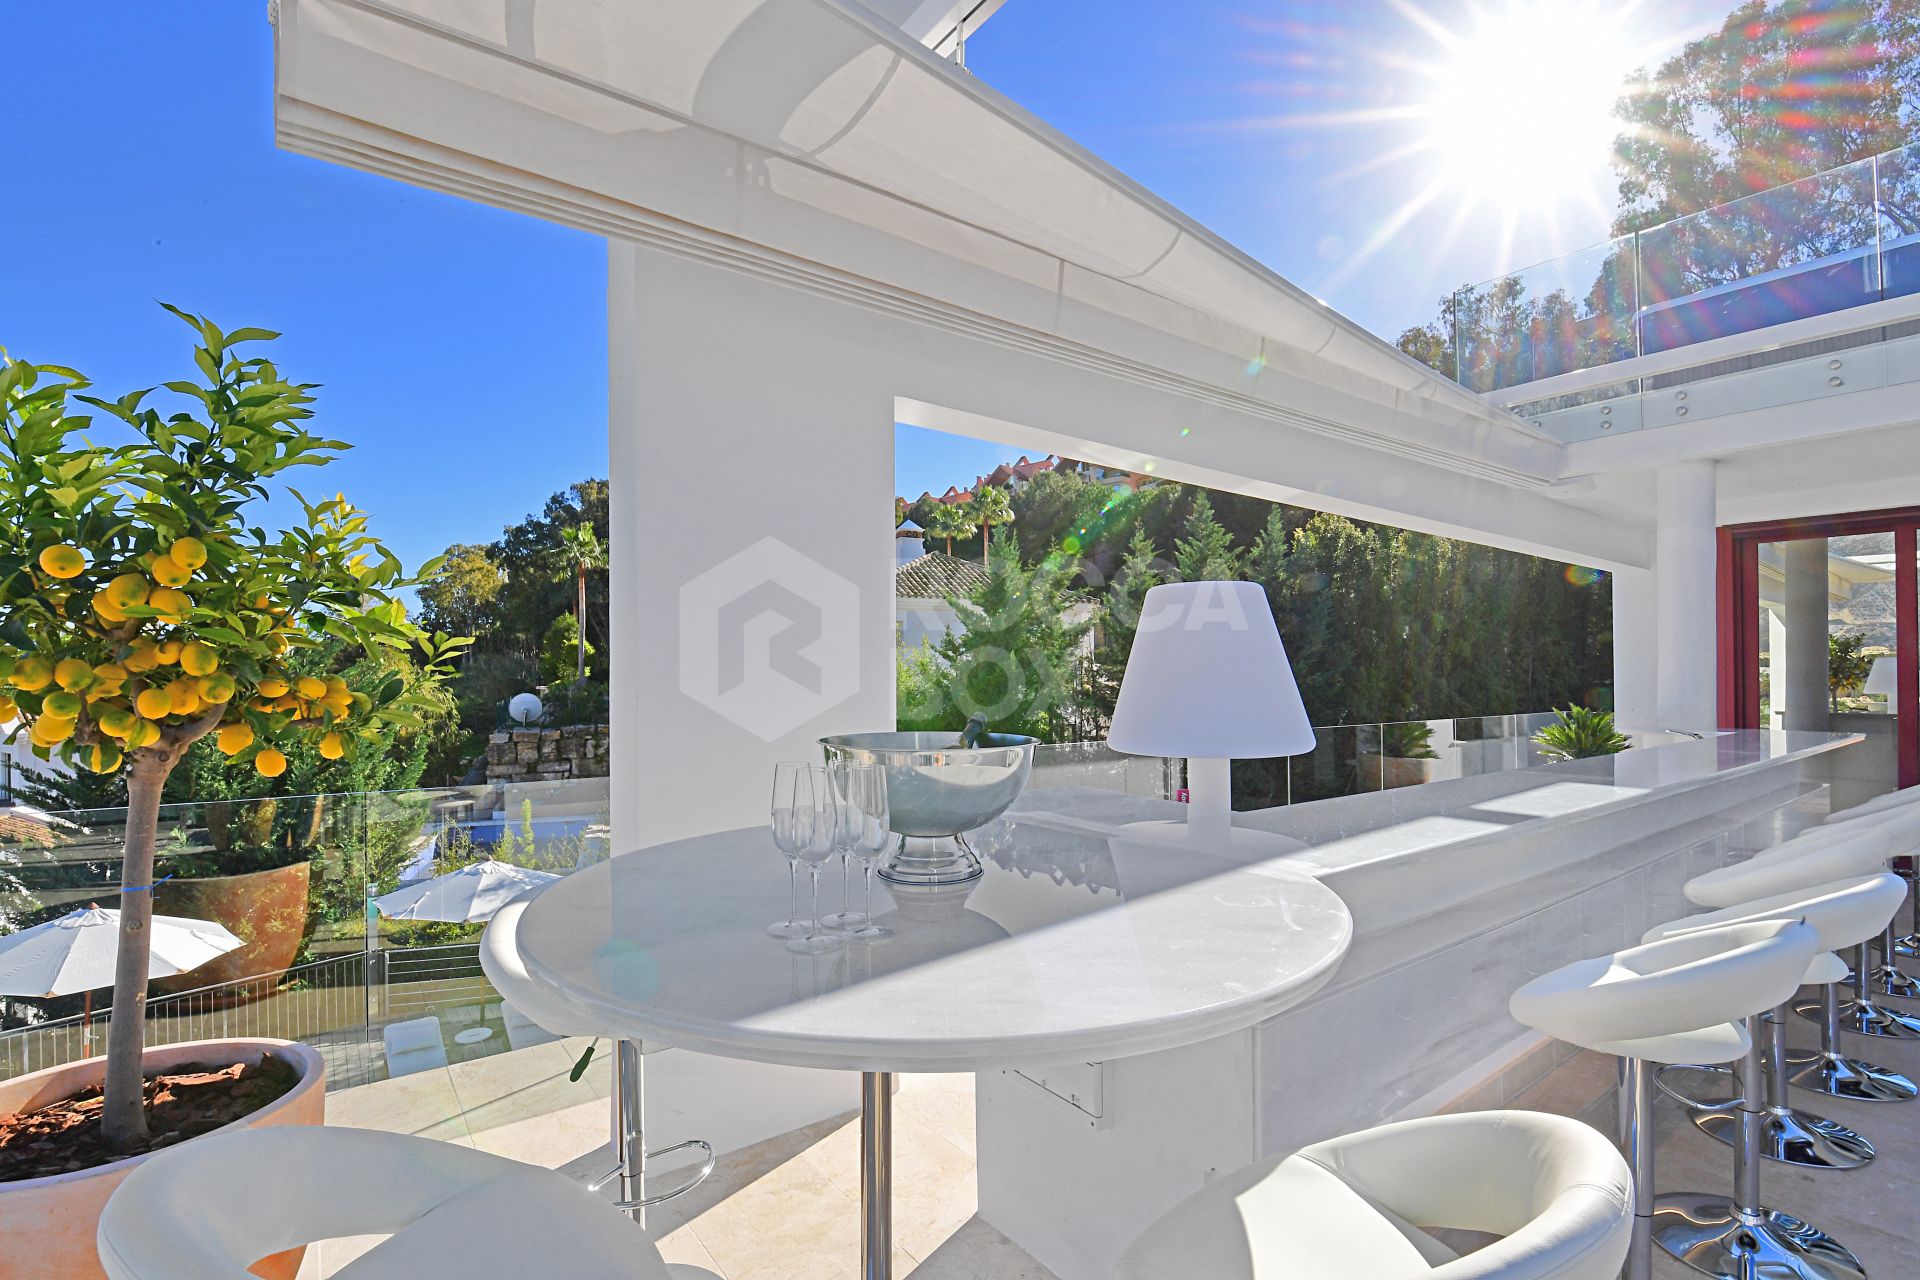 Villa for sale in Nueva Andalucía, a five-minute drive from Puerto Banus and city centre, as well as to beaches